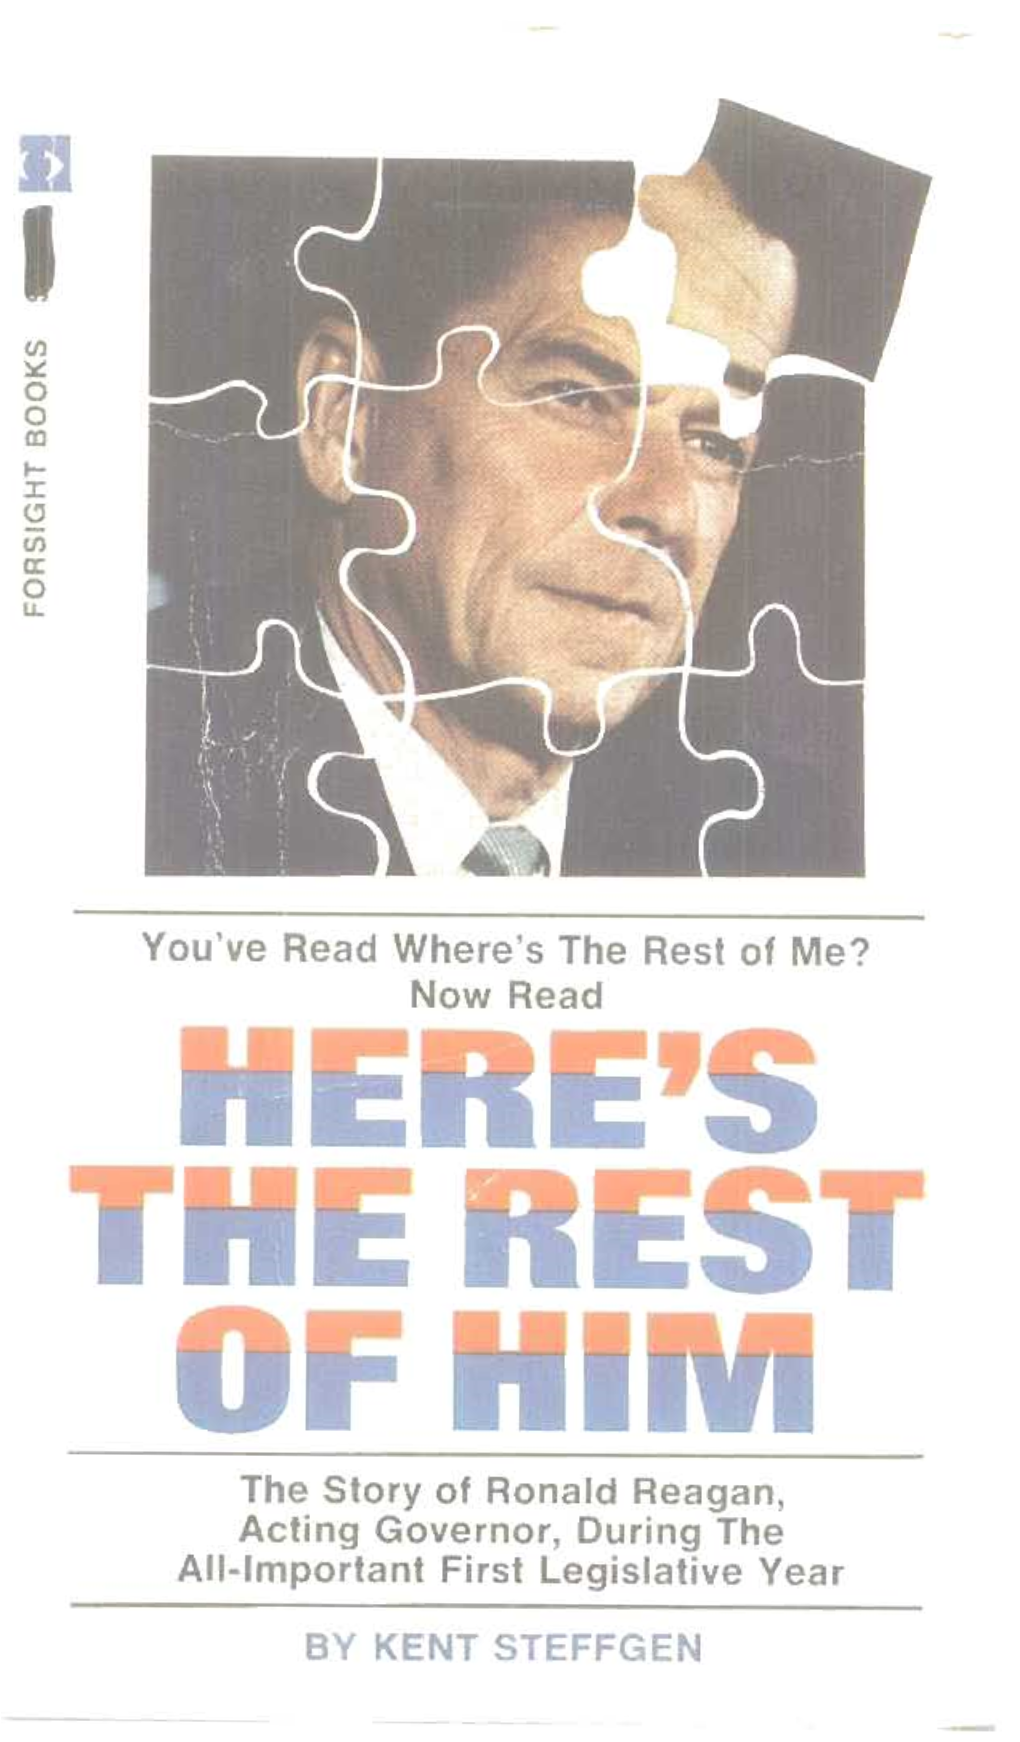 Here's the Rest of Him, by Kent Steffgen Who Reveals the Real Ronald Reagan